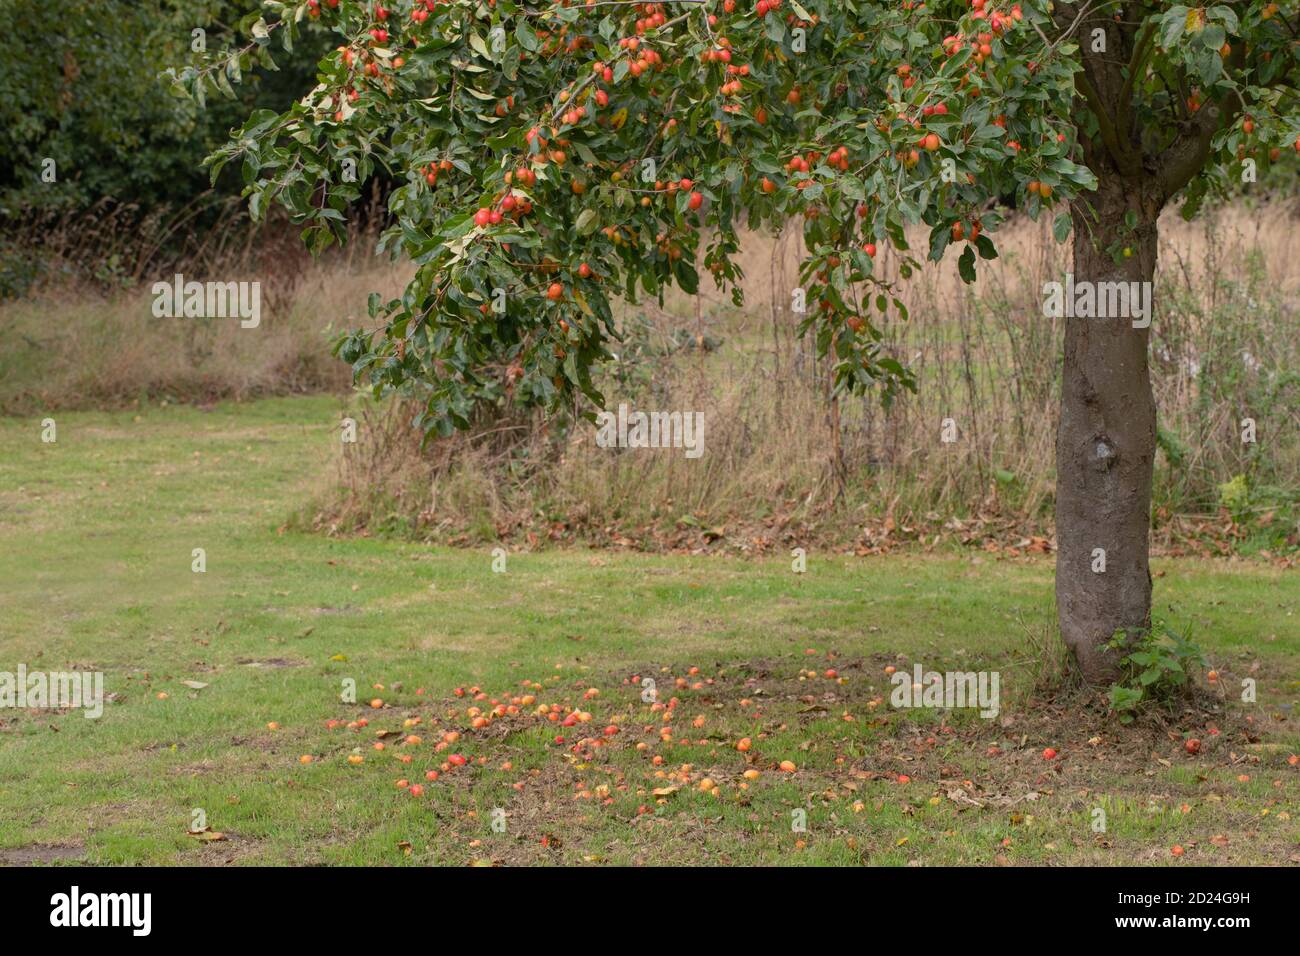 Crab Apple, Tree, fruit, (Malus sylvestris). Colourful autumn fruits. Weight of numbers bearing down branches. Some apples on the ground. Wild ancesto Stock Photo